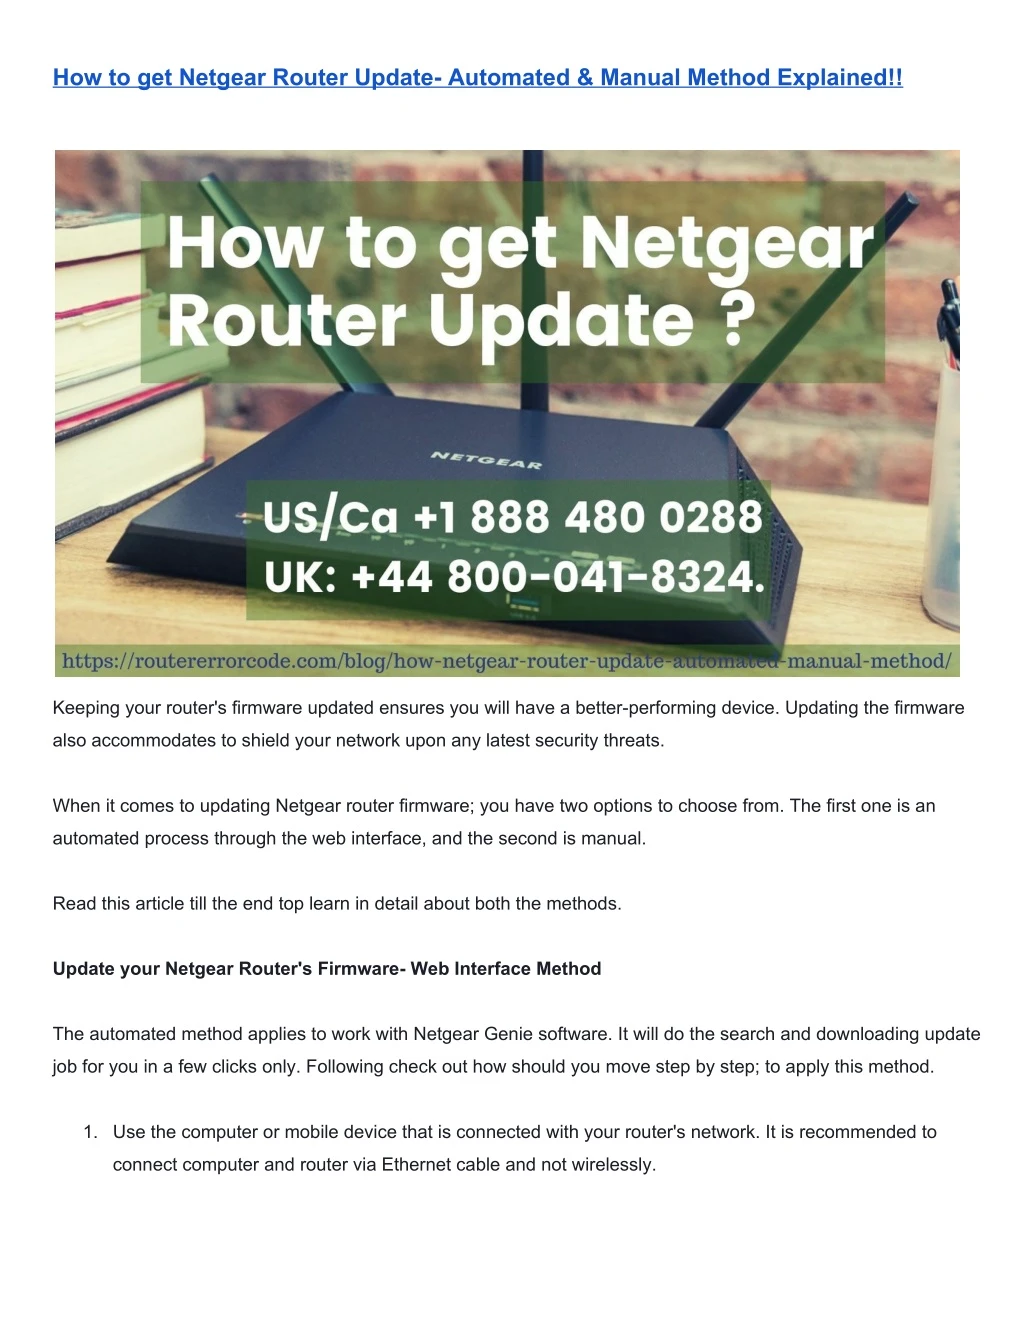 how to get netgear router update automated manual